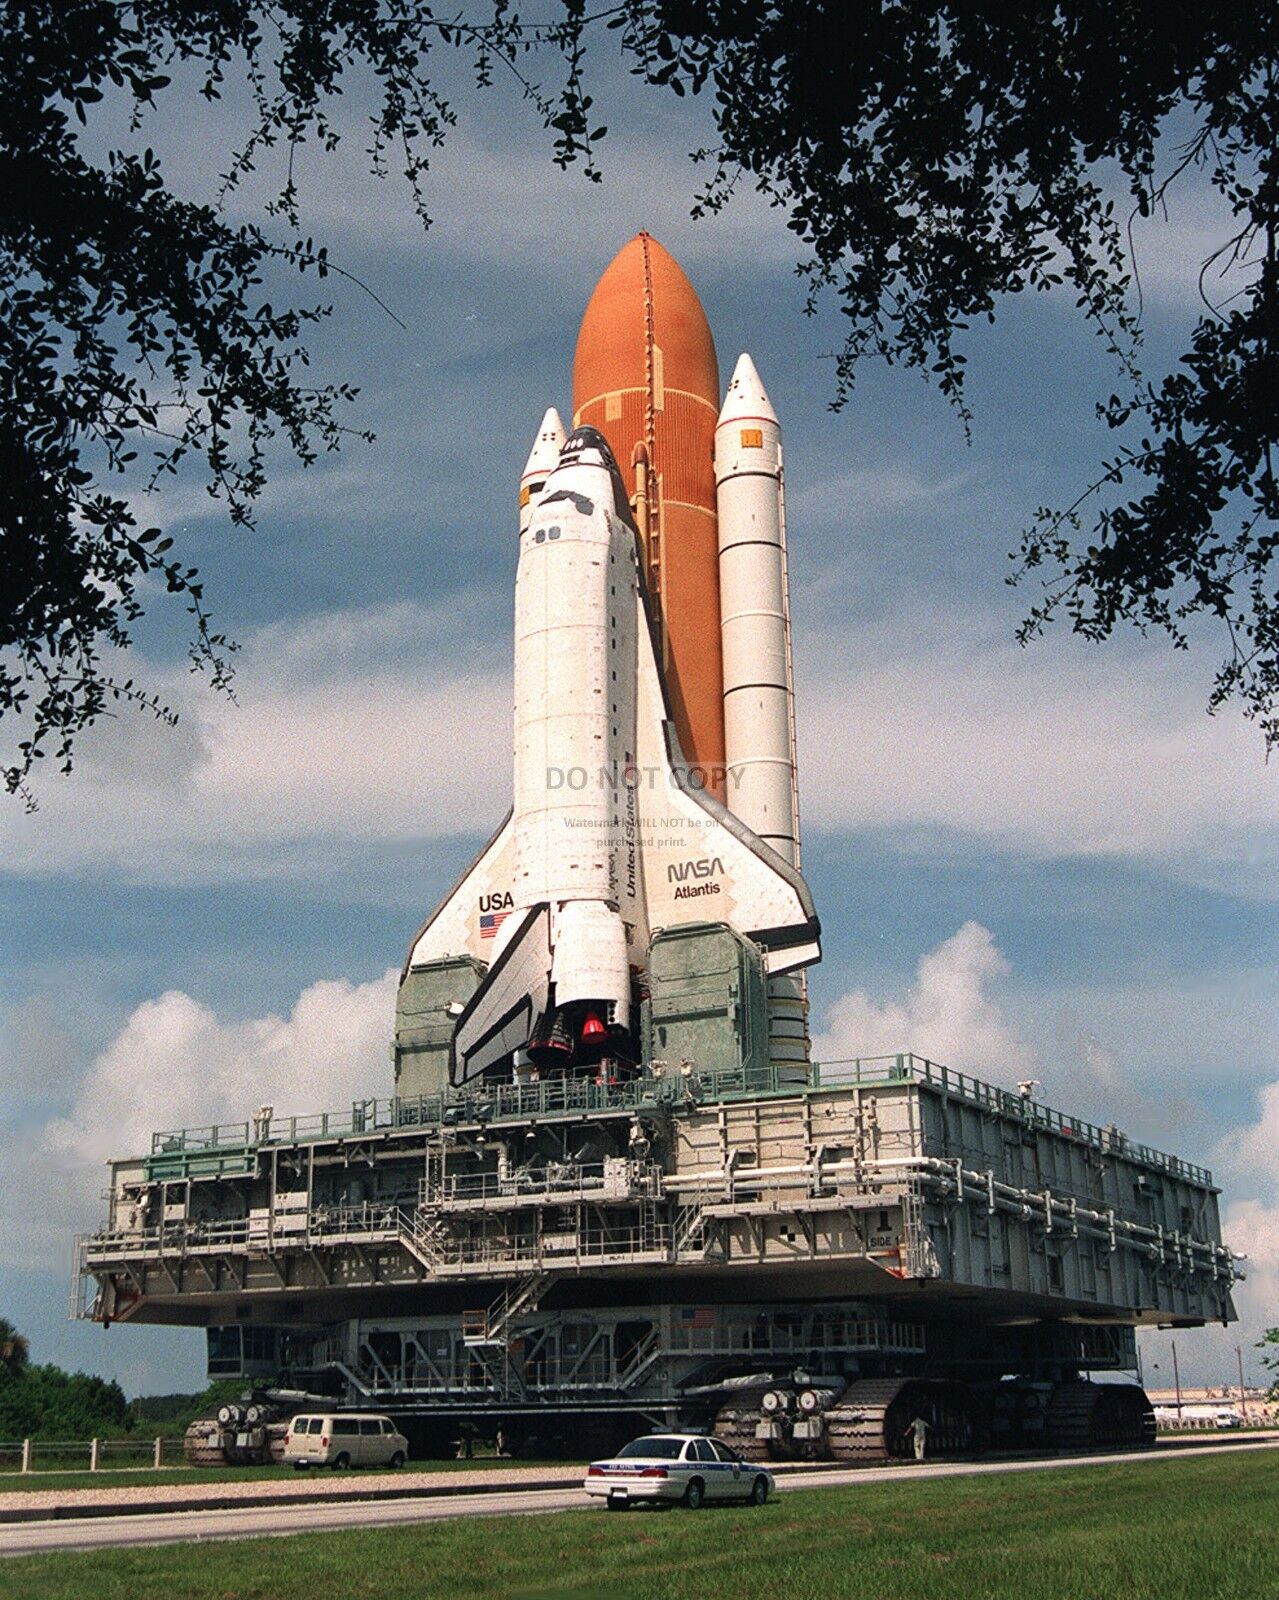 SPACE SHUTTLE ATLANTIS ROLLS TO LAUNCH PAD FOR STS-79   8X10 NASA PHOTO (EP-413)